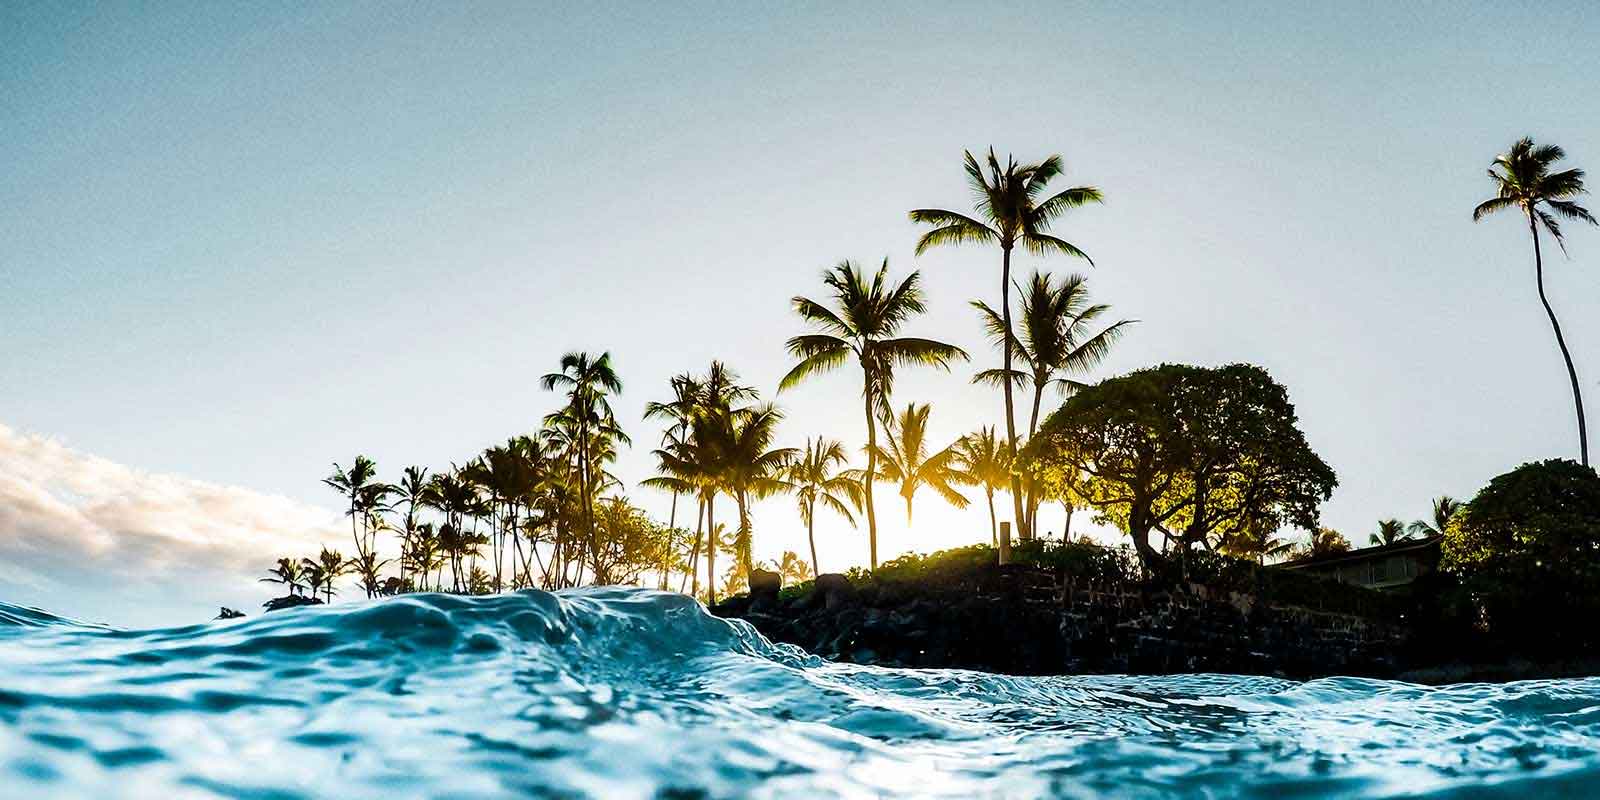 View of palm trees in Hawaii